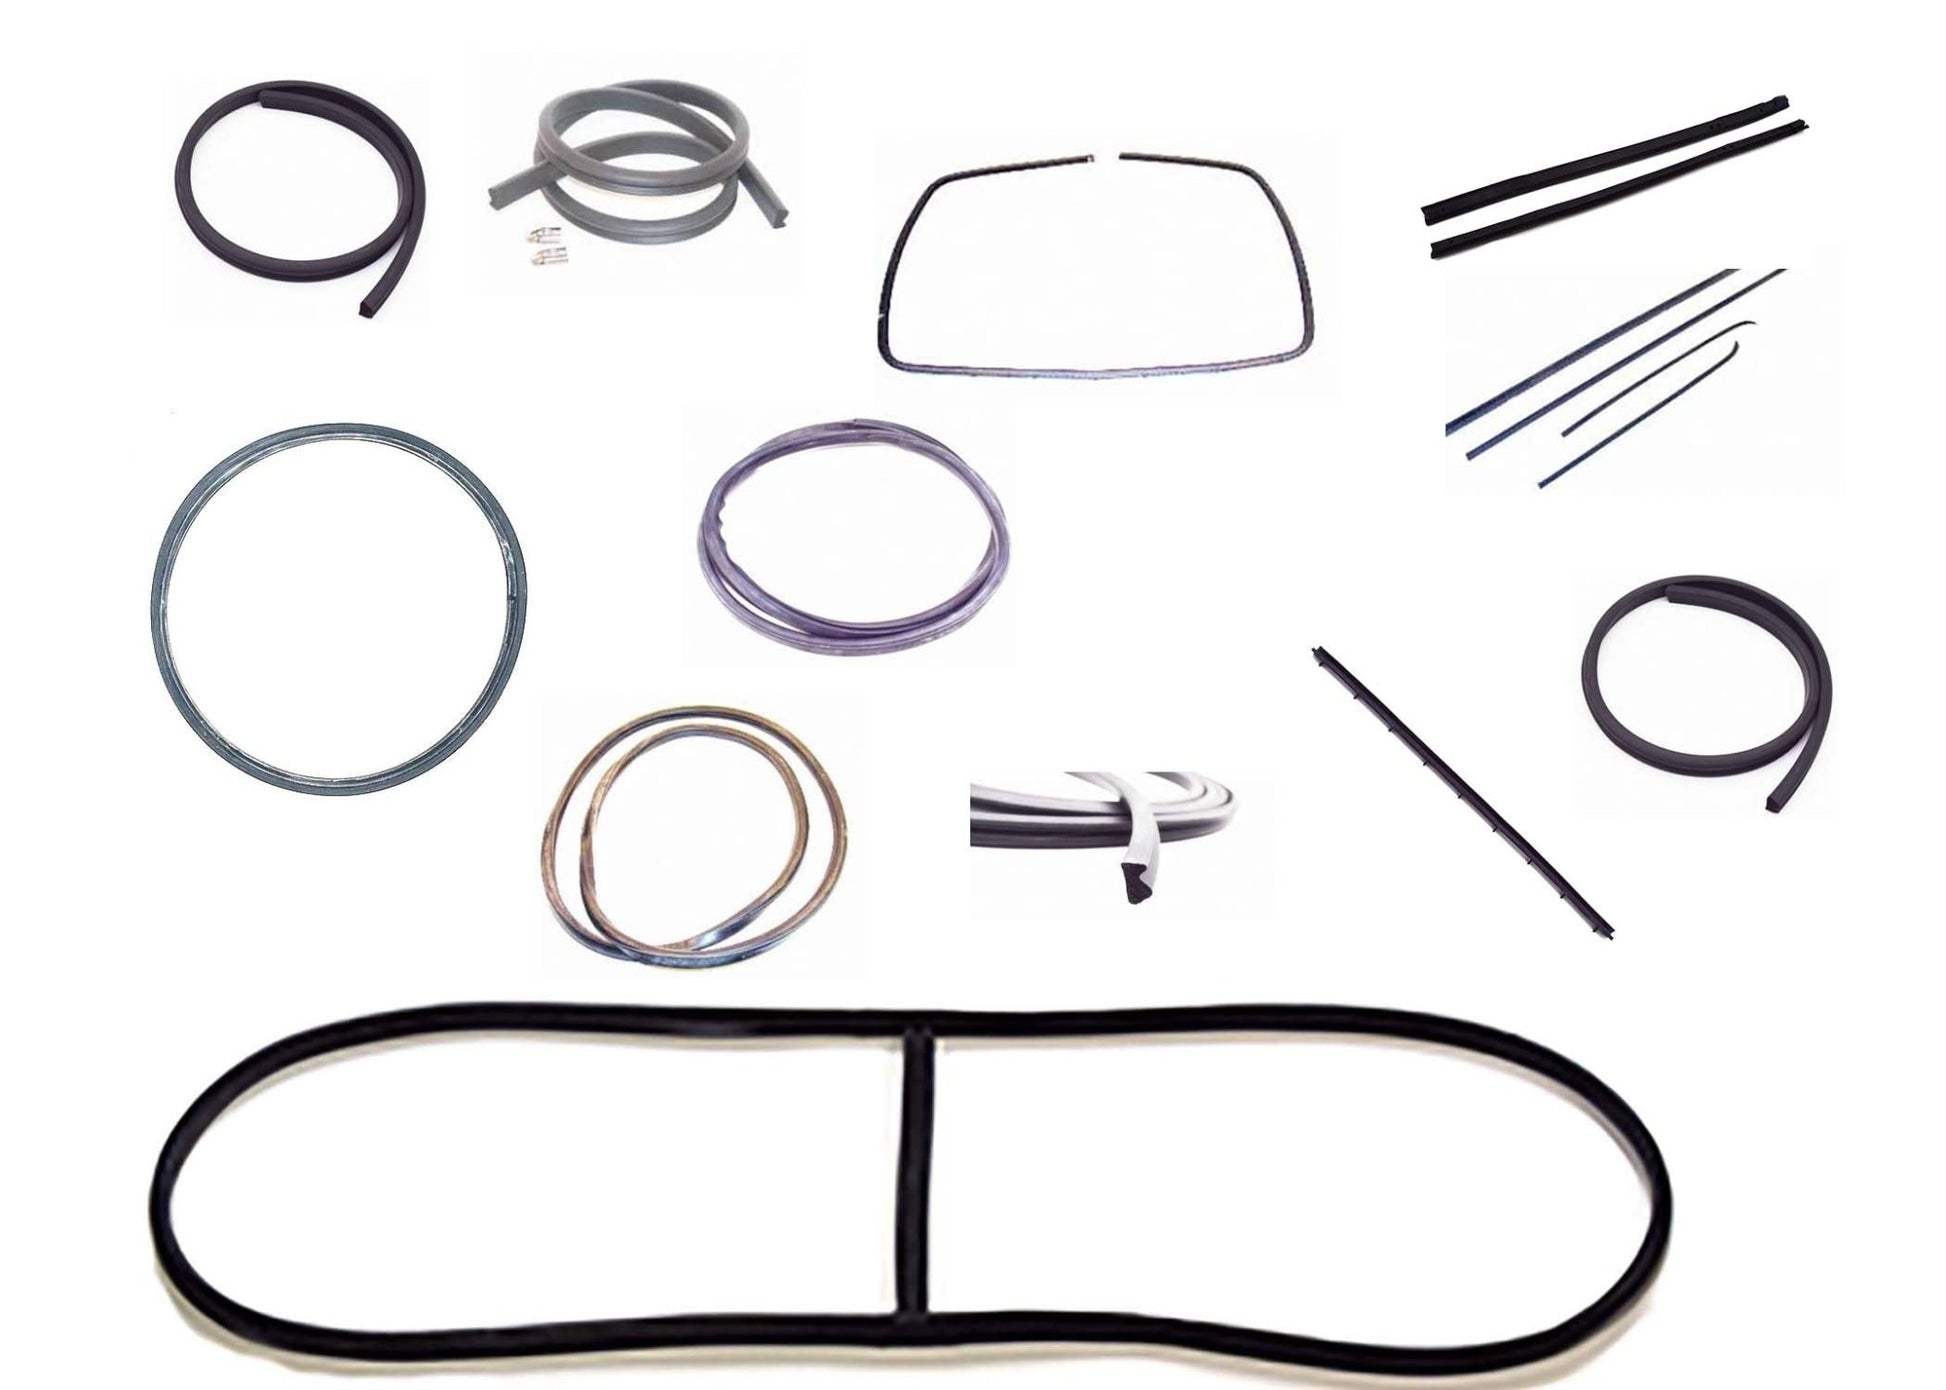 Complete Willys Station Wagon Weather Seal Rubber Kit, 1946-1960 Willys Station Wagon - The JeepsterMan